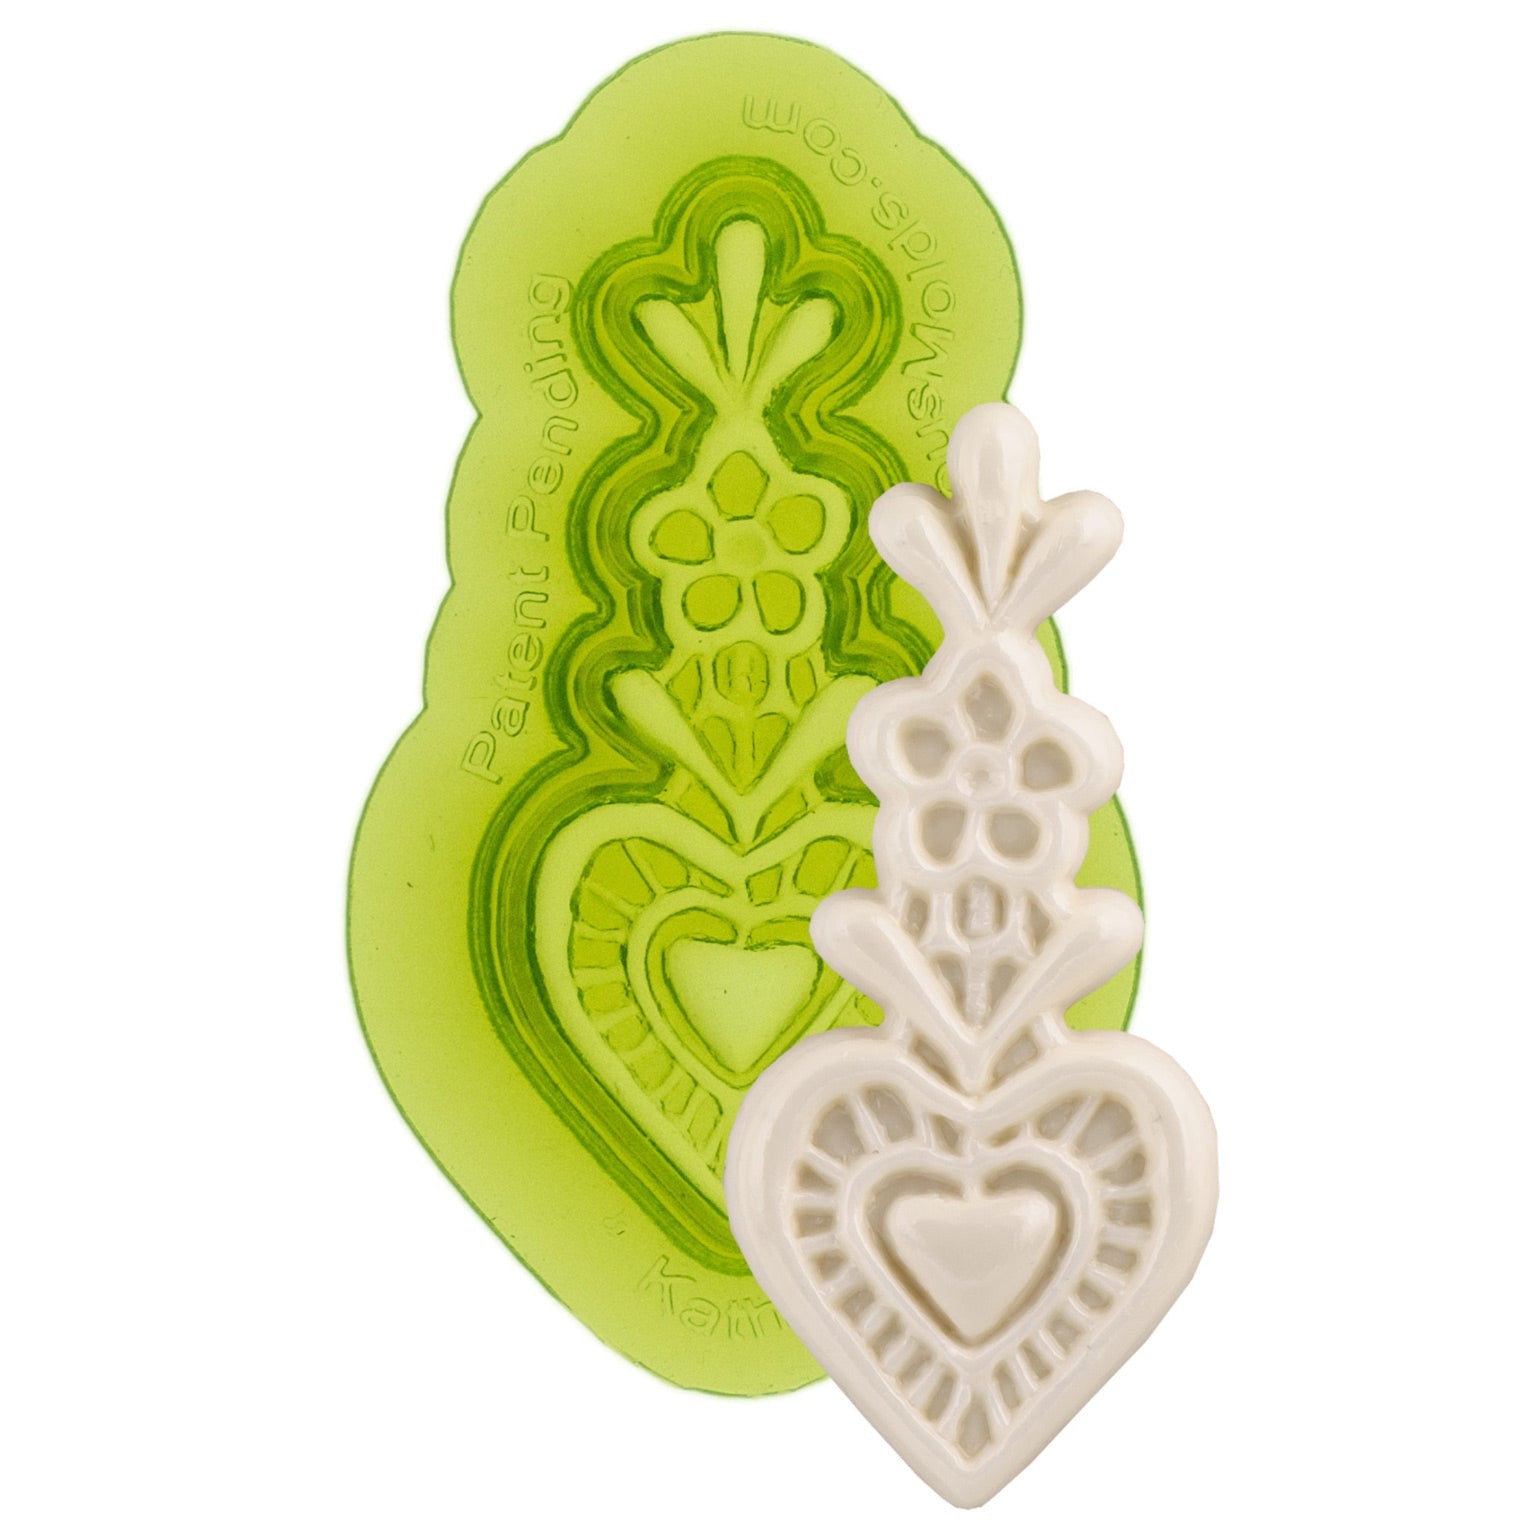 Browse Edna Lace Mold Marvelous Molds and other brands. Stop by our store  today to take advantage of huge savings